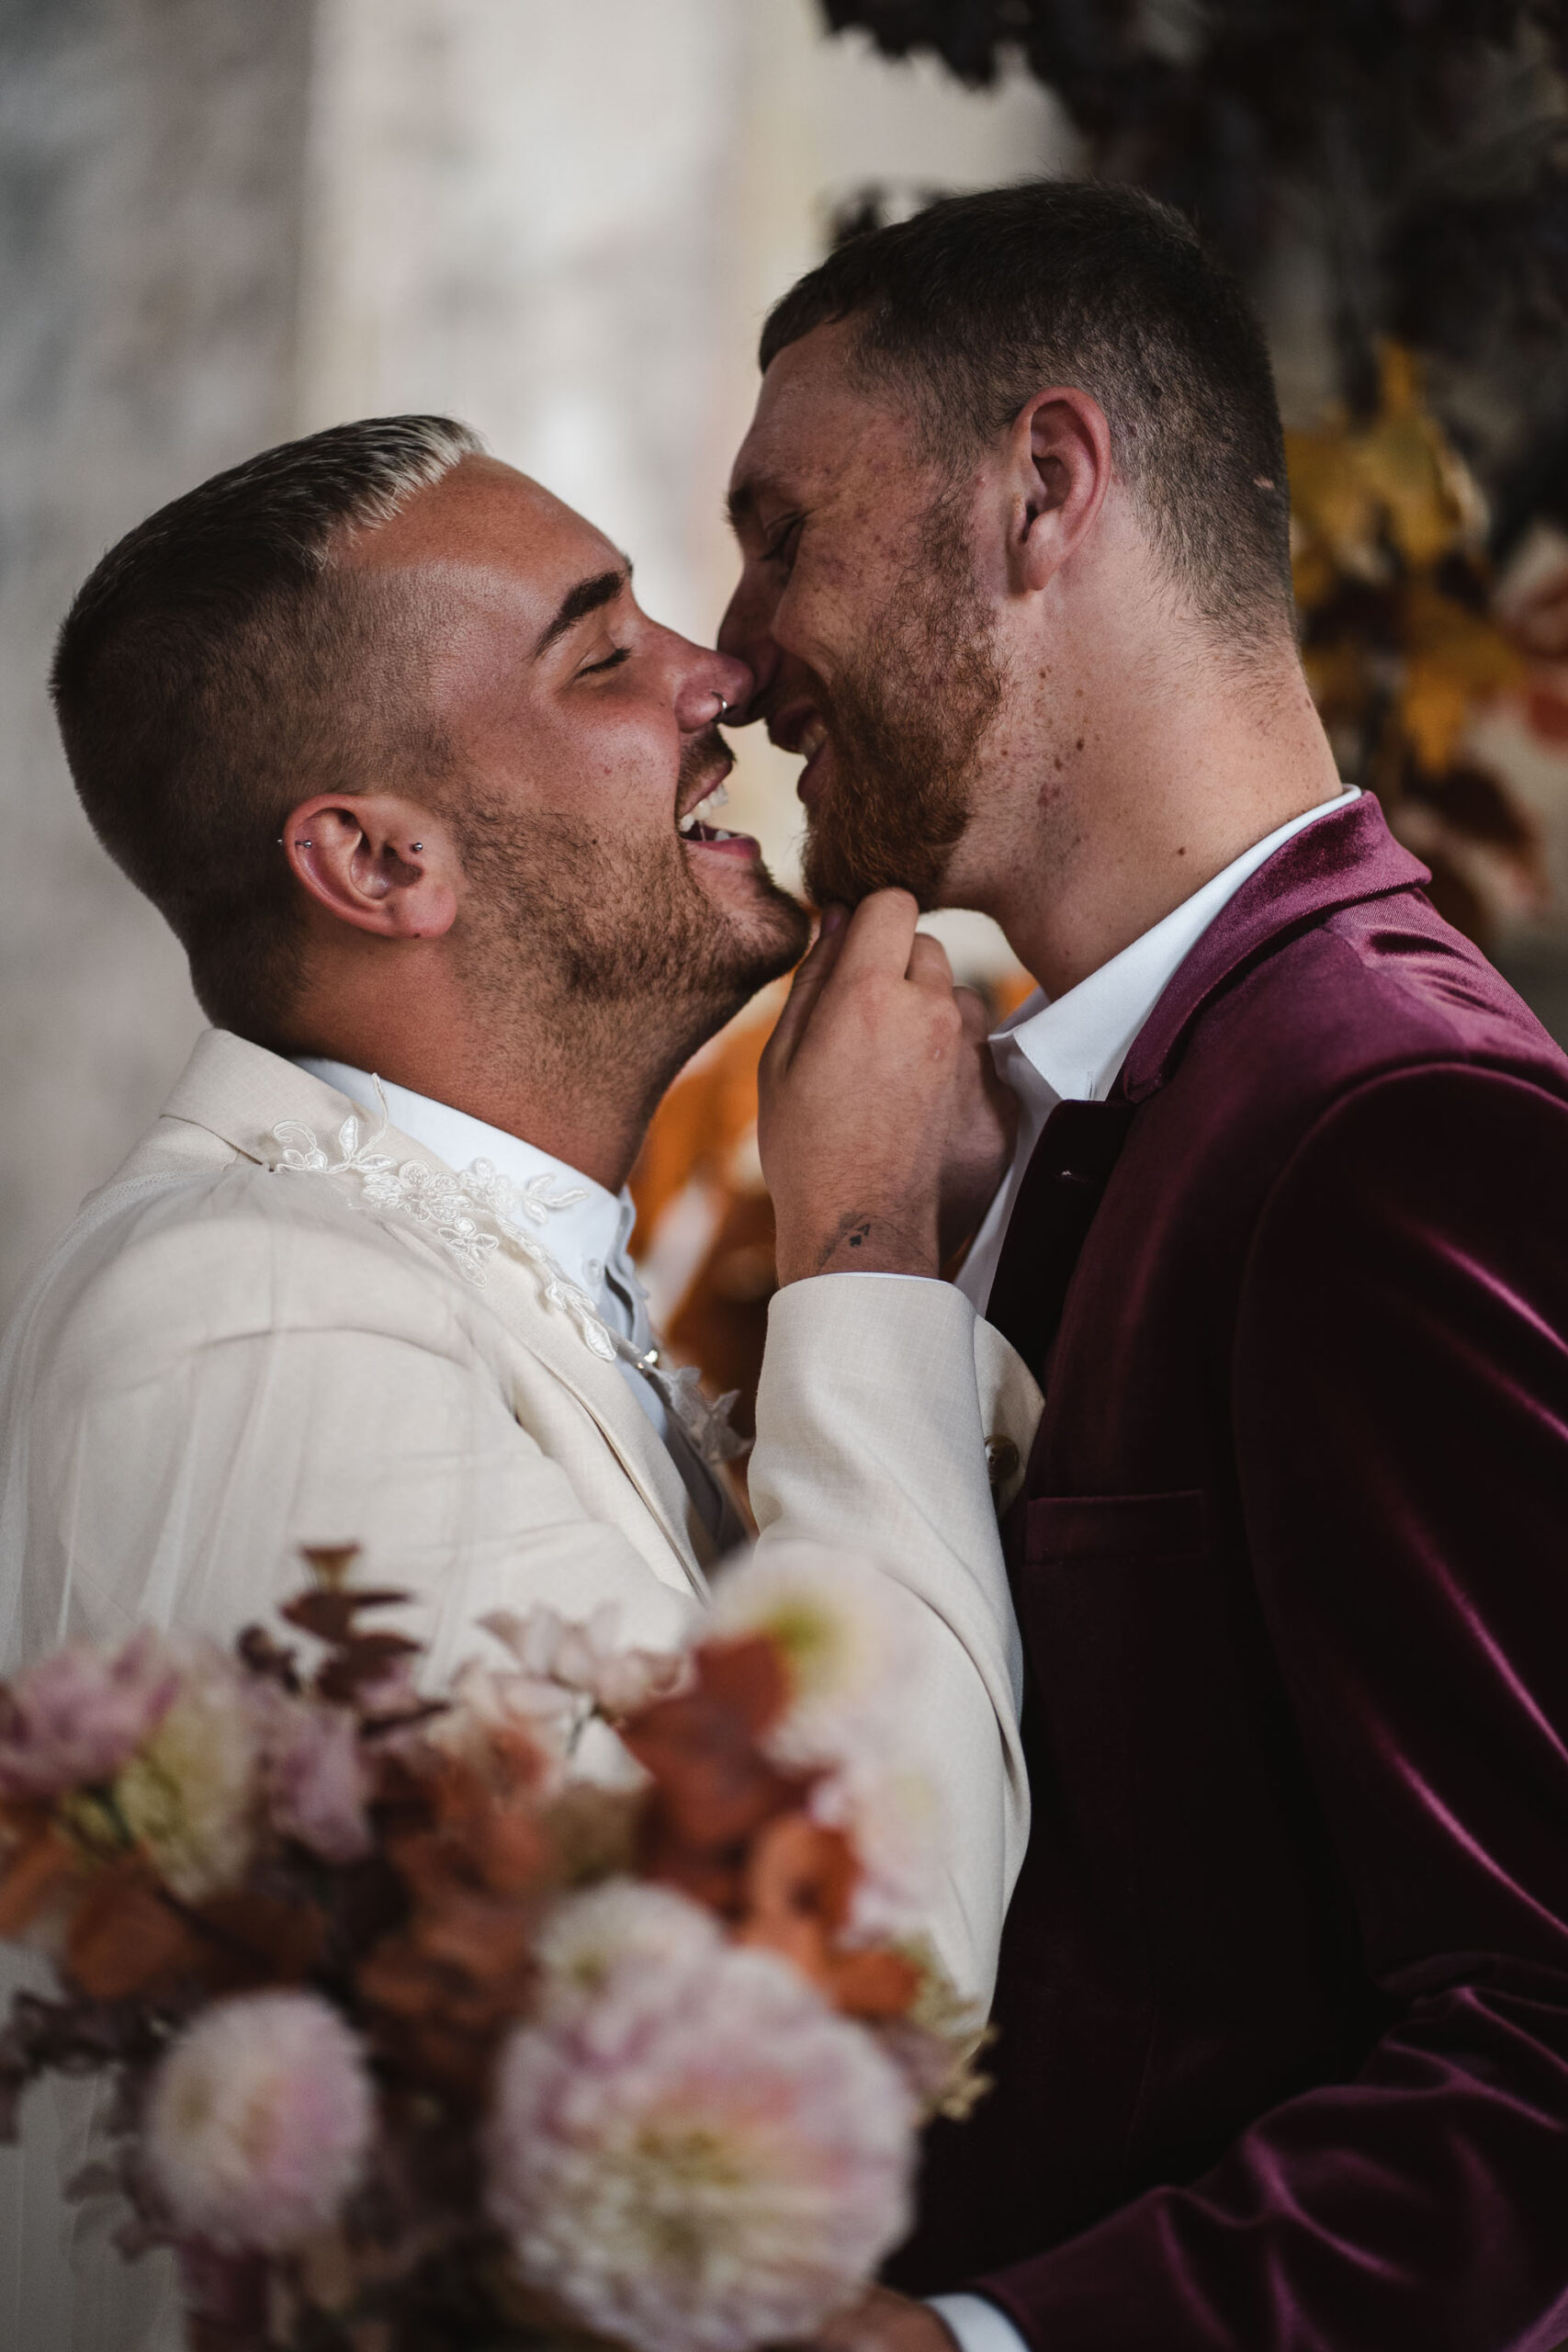 Romantic wedding photograph with a LGBTQ couple about to kiss. By Karolina Photography